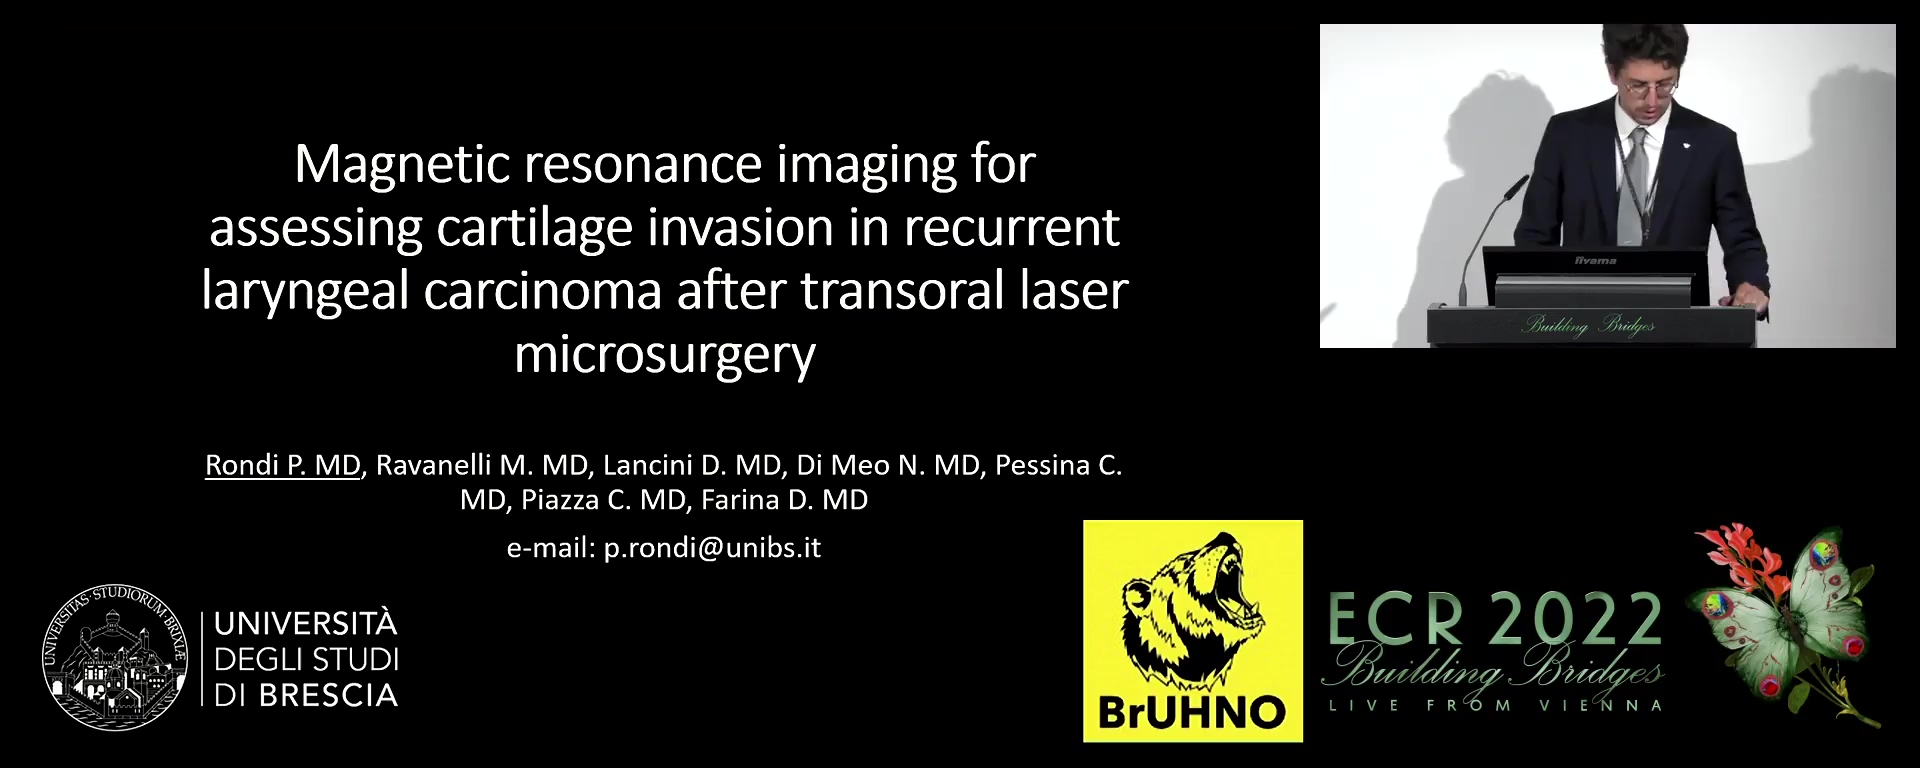 Magnetic resonance imaging for assessing cartilage invasion in recurrent laryngeal carcinoma after transoral laser microsurgery